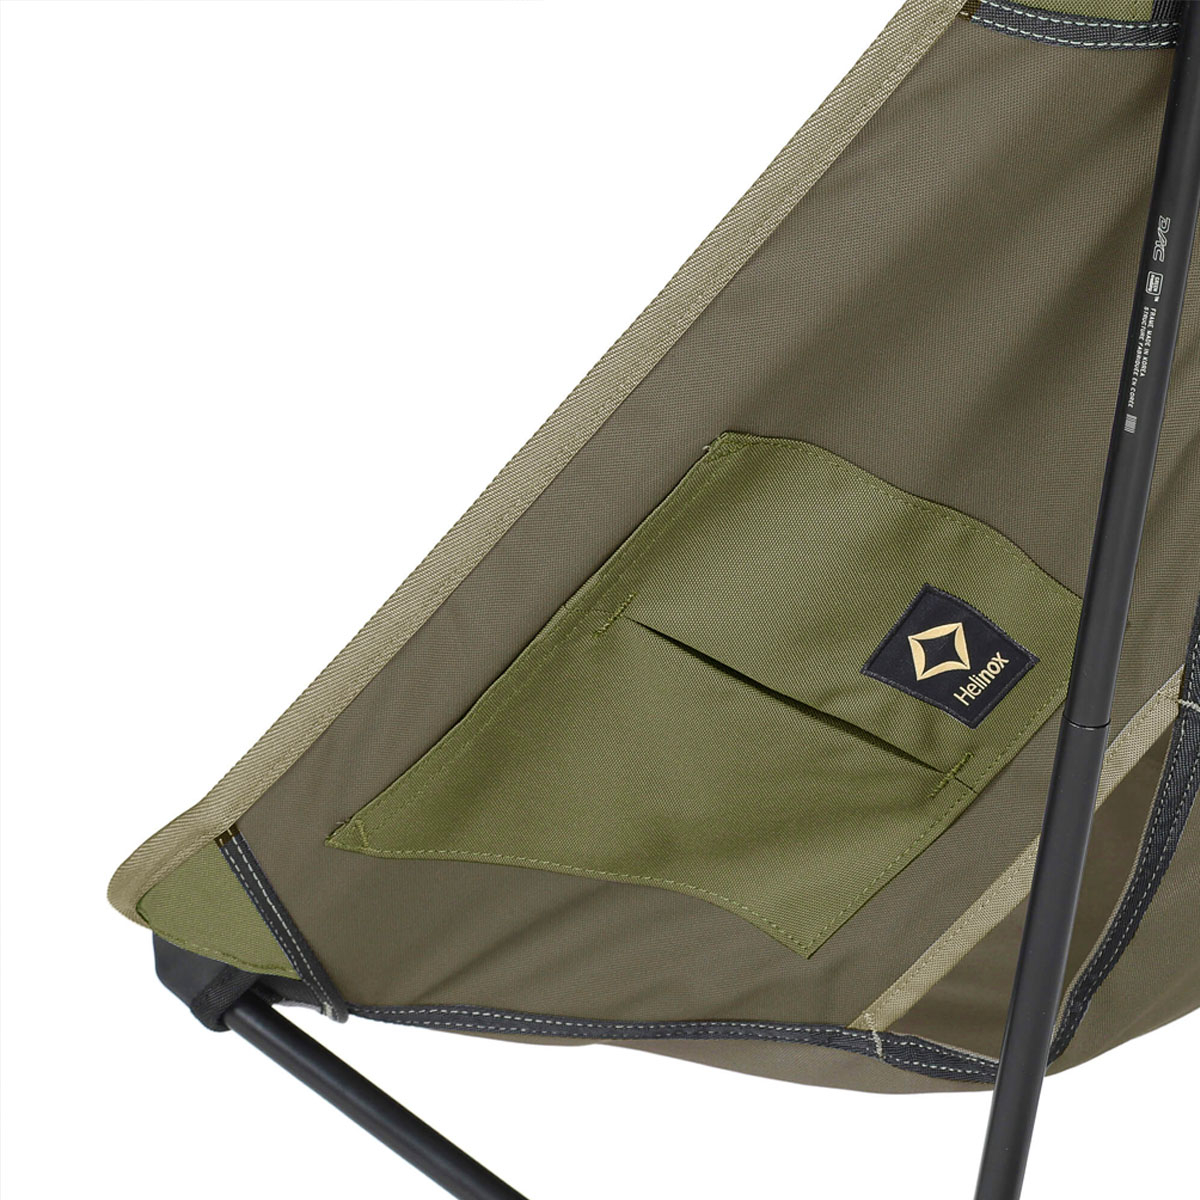 Helinox Tactical Chair One Military Olive, with added pockets to secure valuables and gear